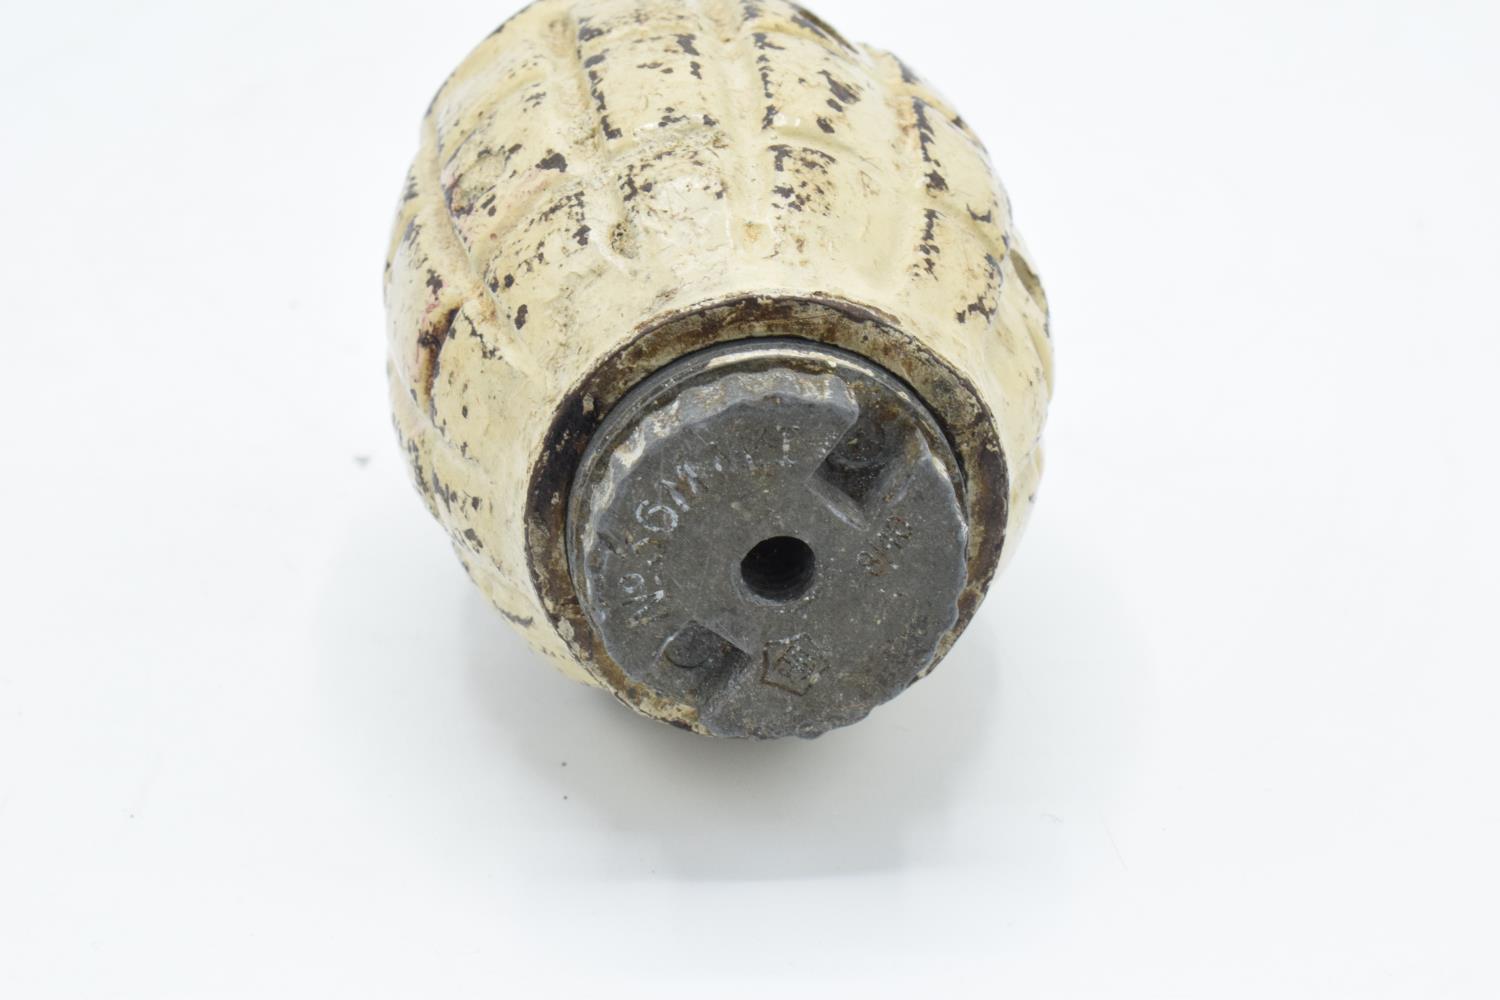 Mid-late 20th century Mills bomb Number 36 hand grenade, inept and FFE. The grenade has been drilled - Image 6 of 7